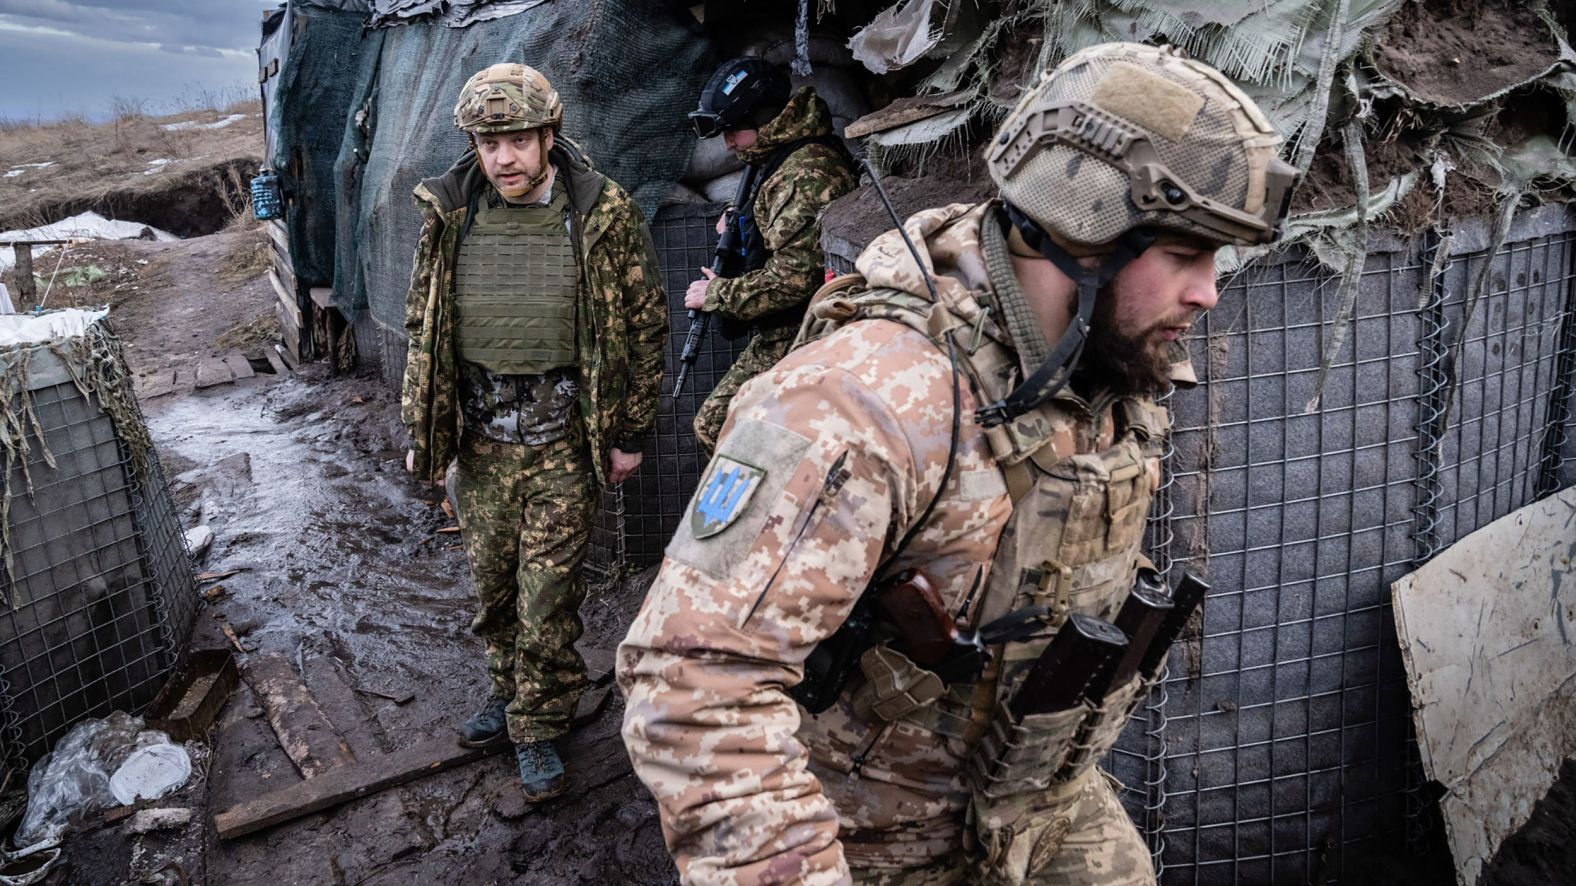 Ukrainian Interior Minister Denys Monastyrskiy, left, visits soldiers at a front-line position in Novoluhanske on February 19. Minutes after he left, <a href="index.php?page=&url=https%3A%2F%2Fwww.cnn.com%2Feurope%2Flive-news%2Fukraine-russia-news-02-19-22-intl%2Fh_d1ce9212df87ddbf0f79e4c4e4a6df56" target="_blank">the position came under fire.</a> No one was injured.